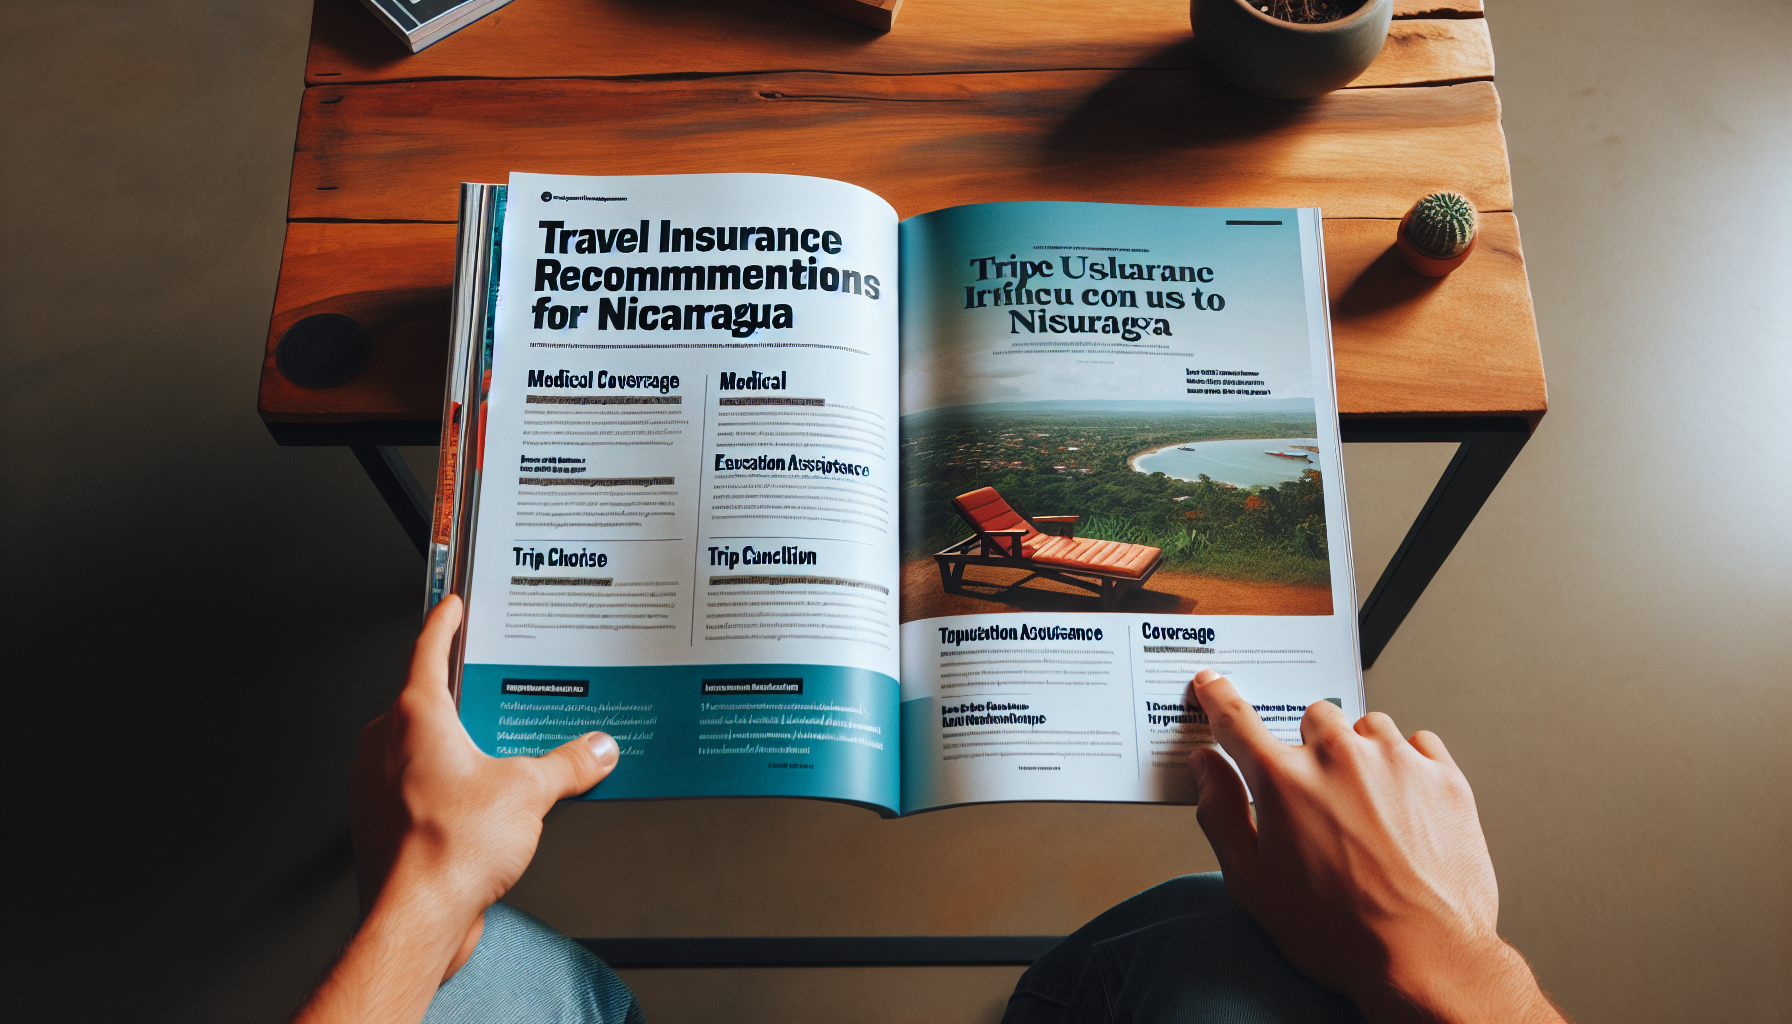 Are There Any Specific Travel Insurance Recommendations For Nicaragua?